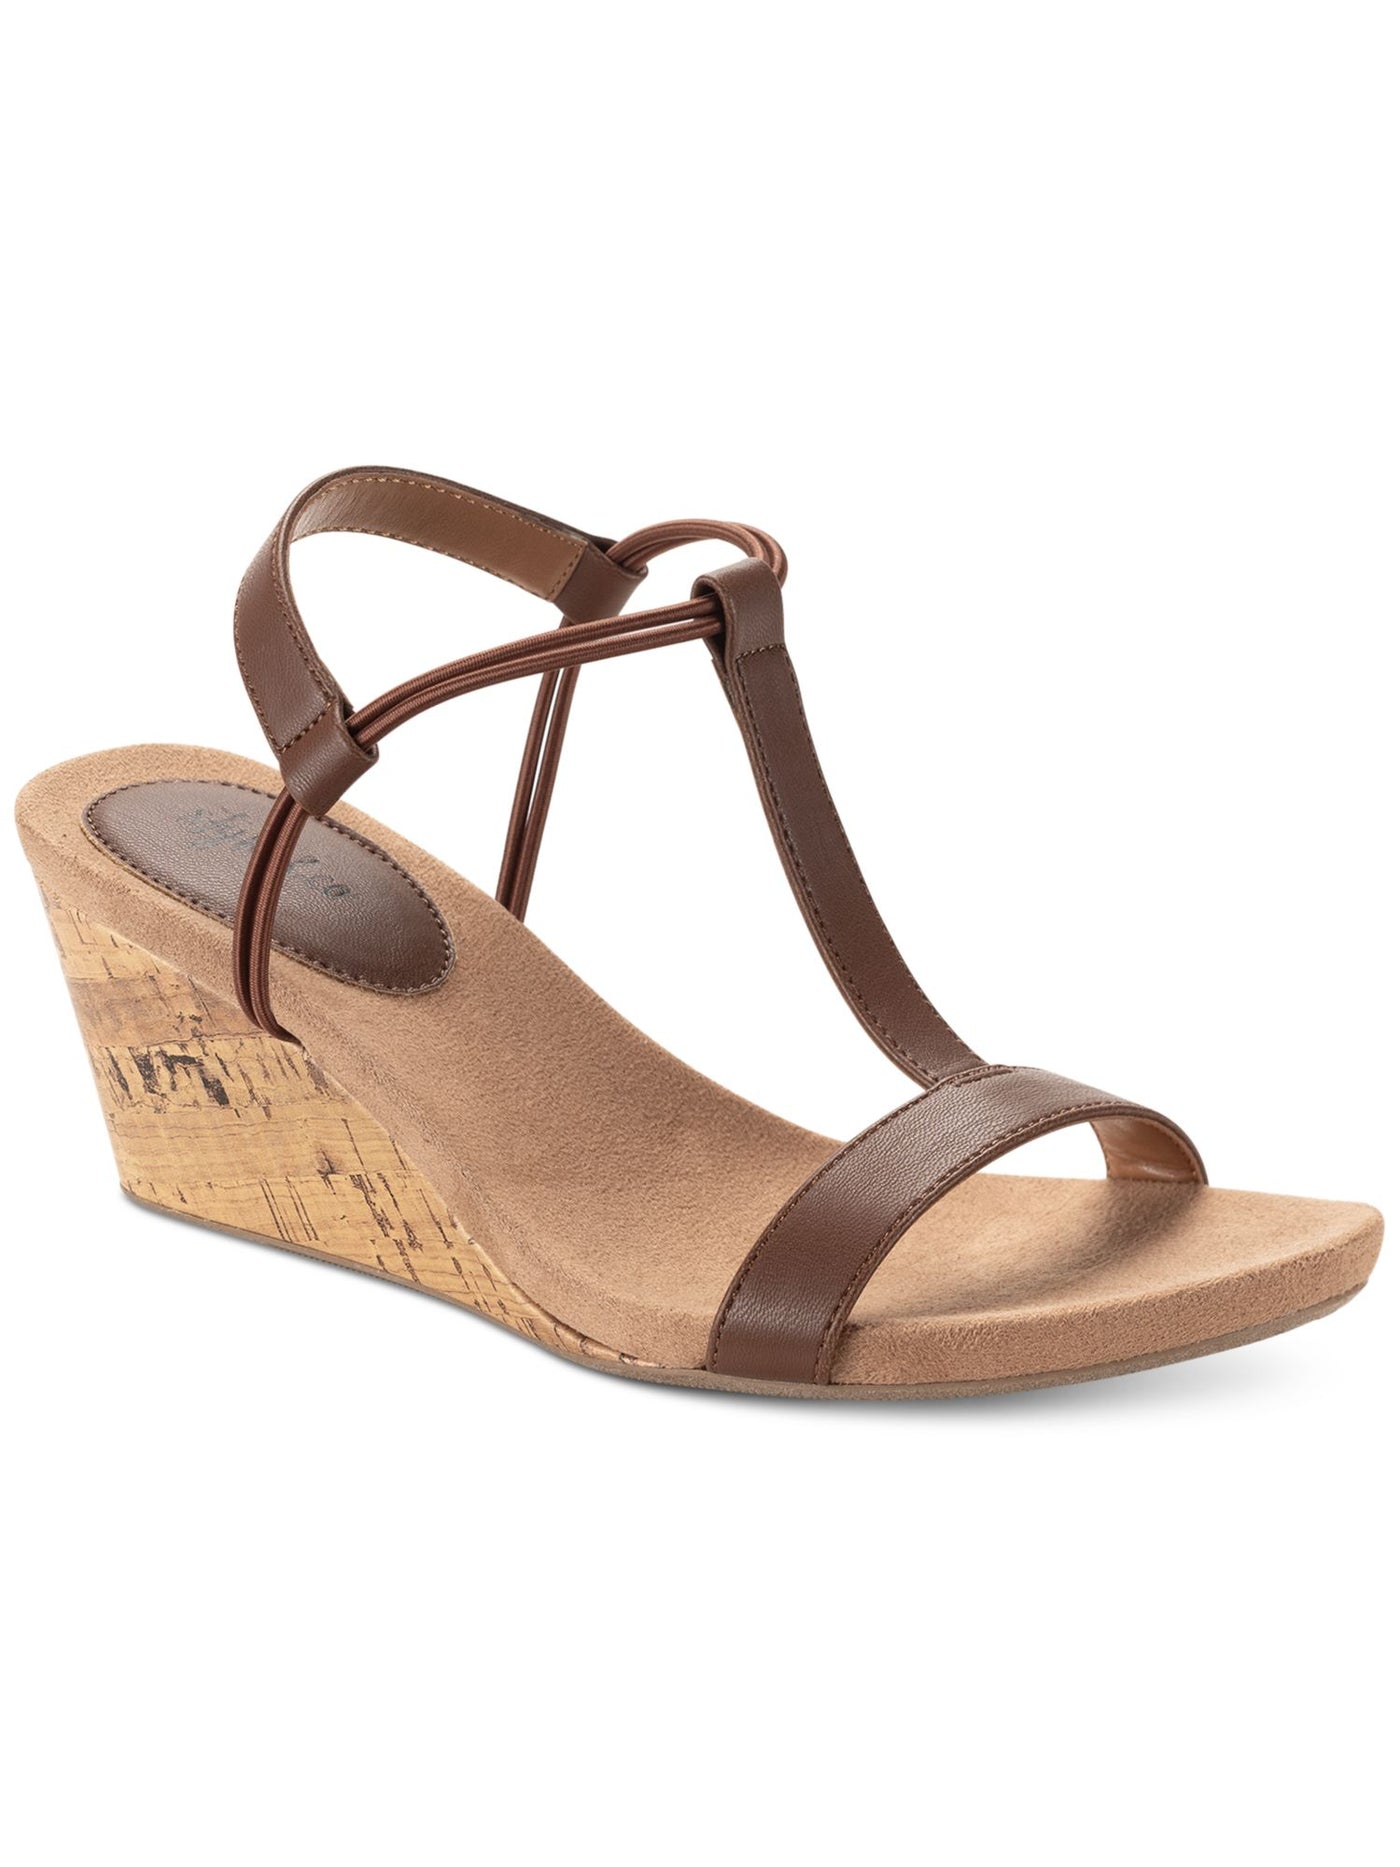 STYLE & COMPANY Womens Brown T-Strap Padded Slip Resistant Stretch Mulan Round Toe Wedge Slip On Slingback Sandal 10.5